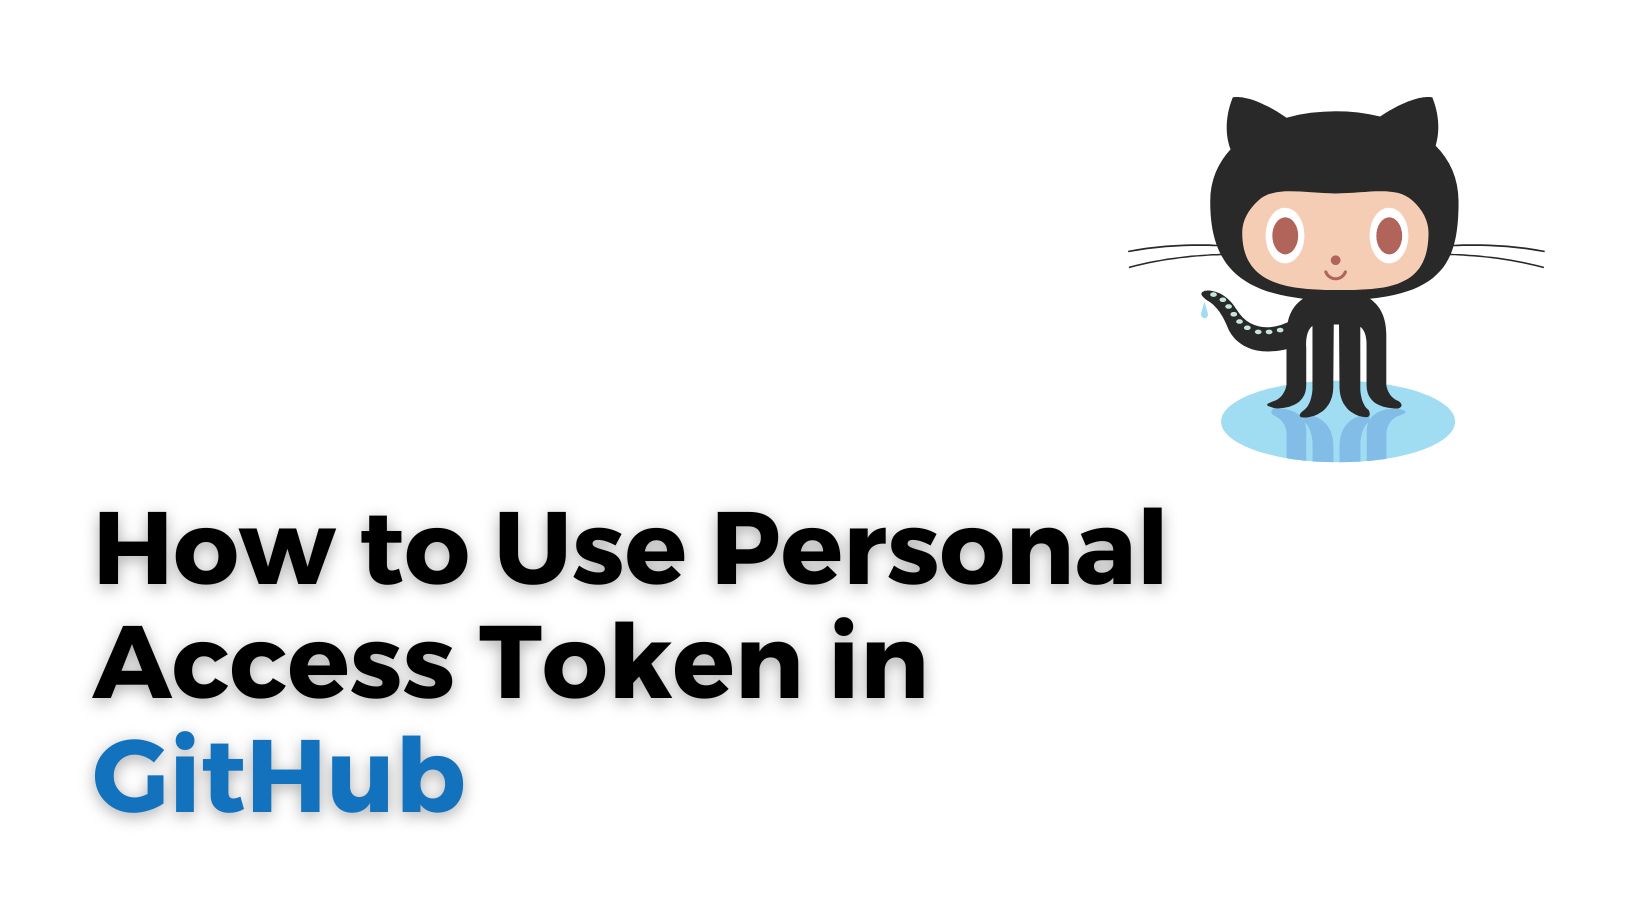 How to Use Personal Access Token in GitHub: Step-by-Step Guide